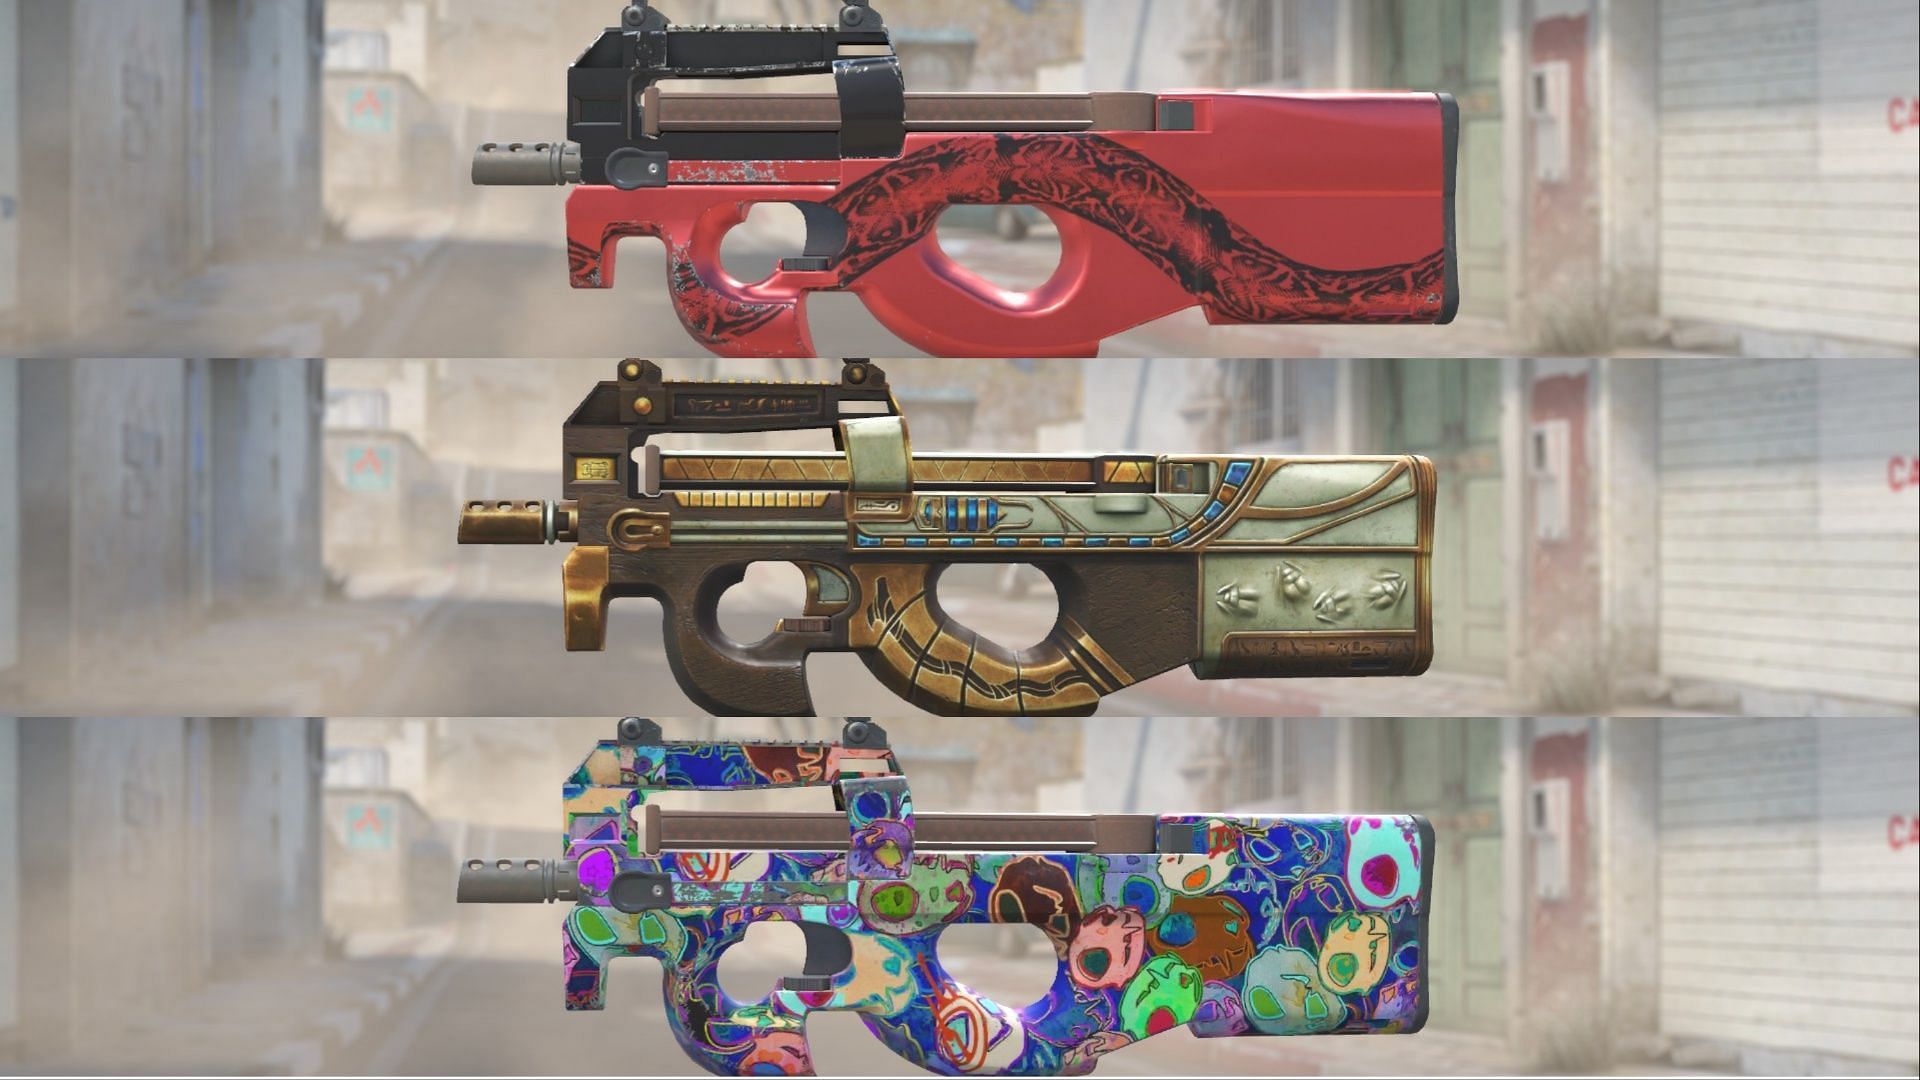 P90 skins, Cold Blooded, ScaraB Rush and Death by Kitty (Image via Valve)